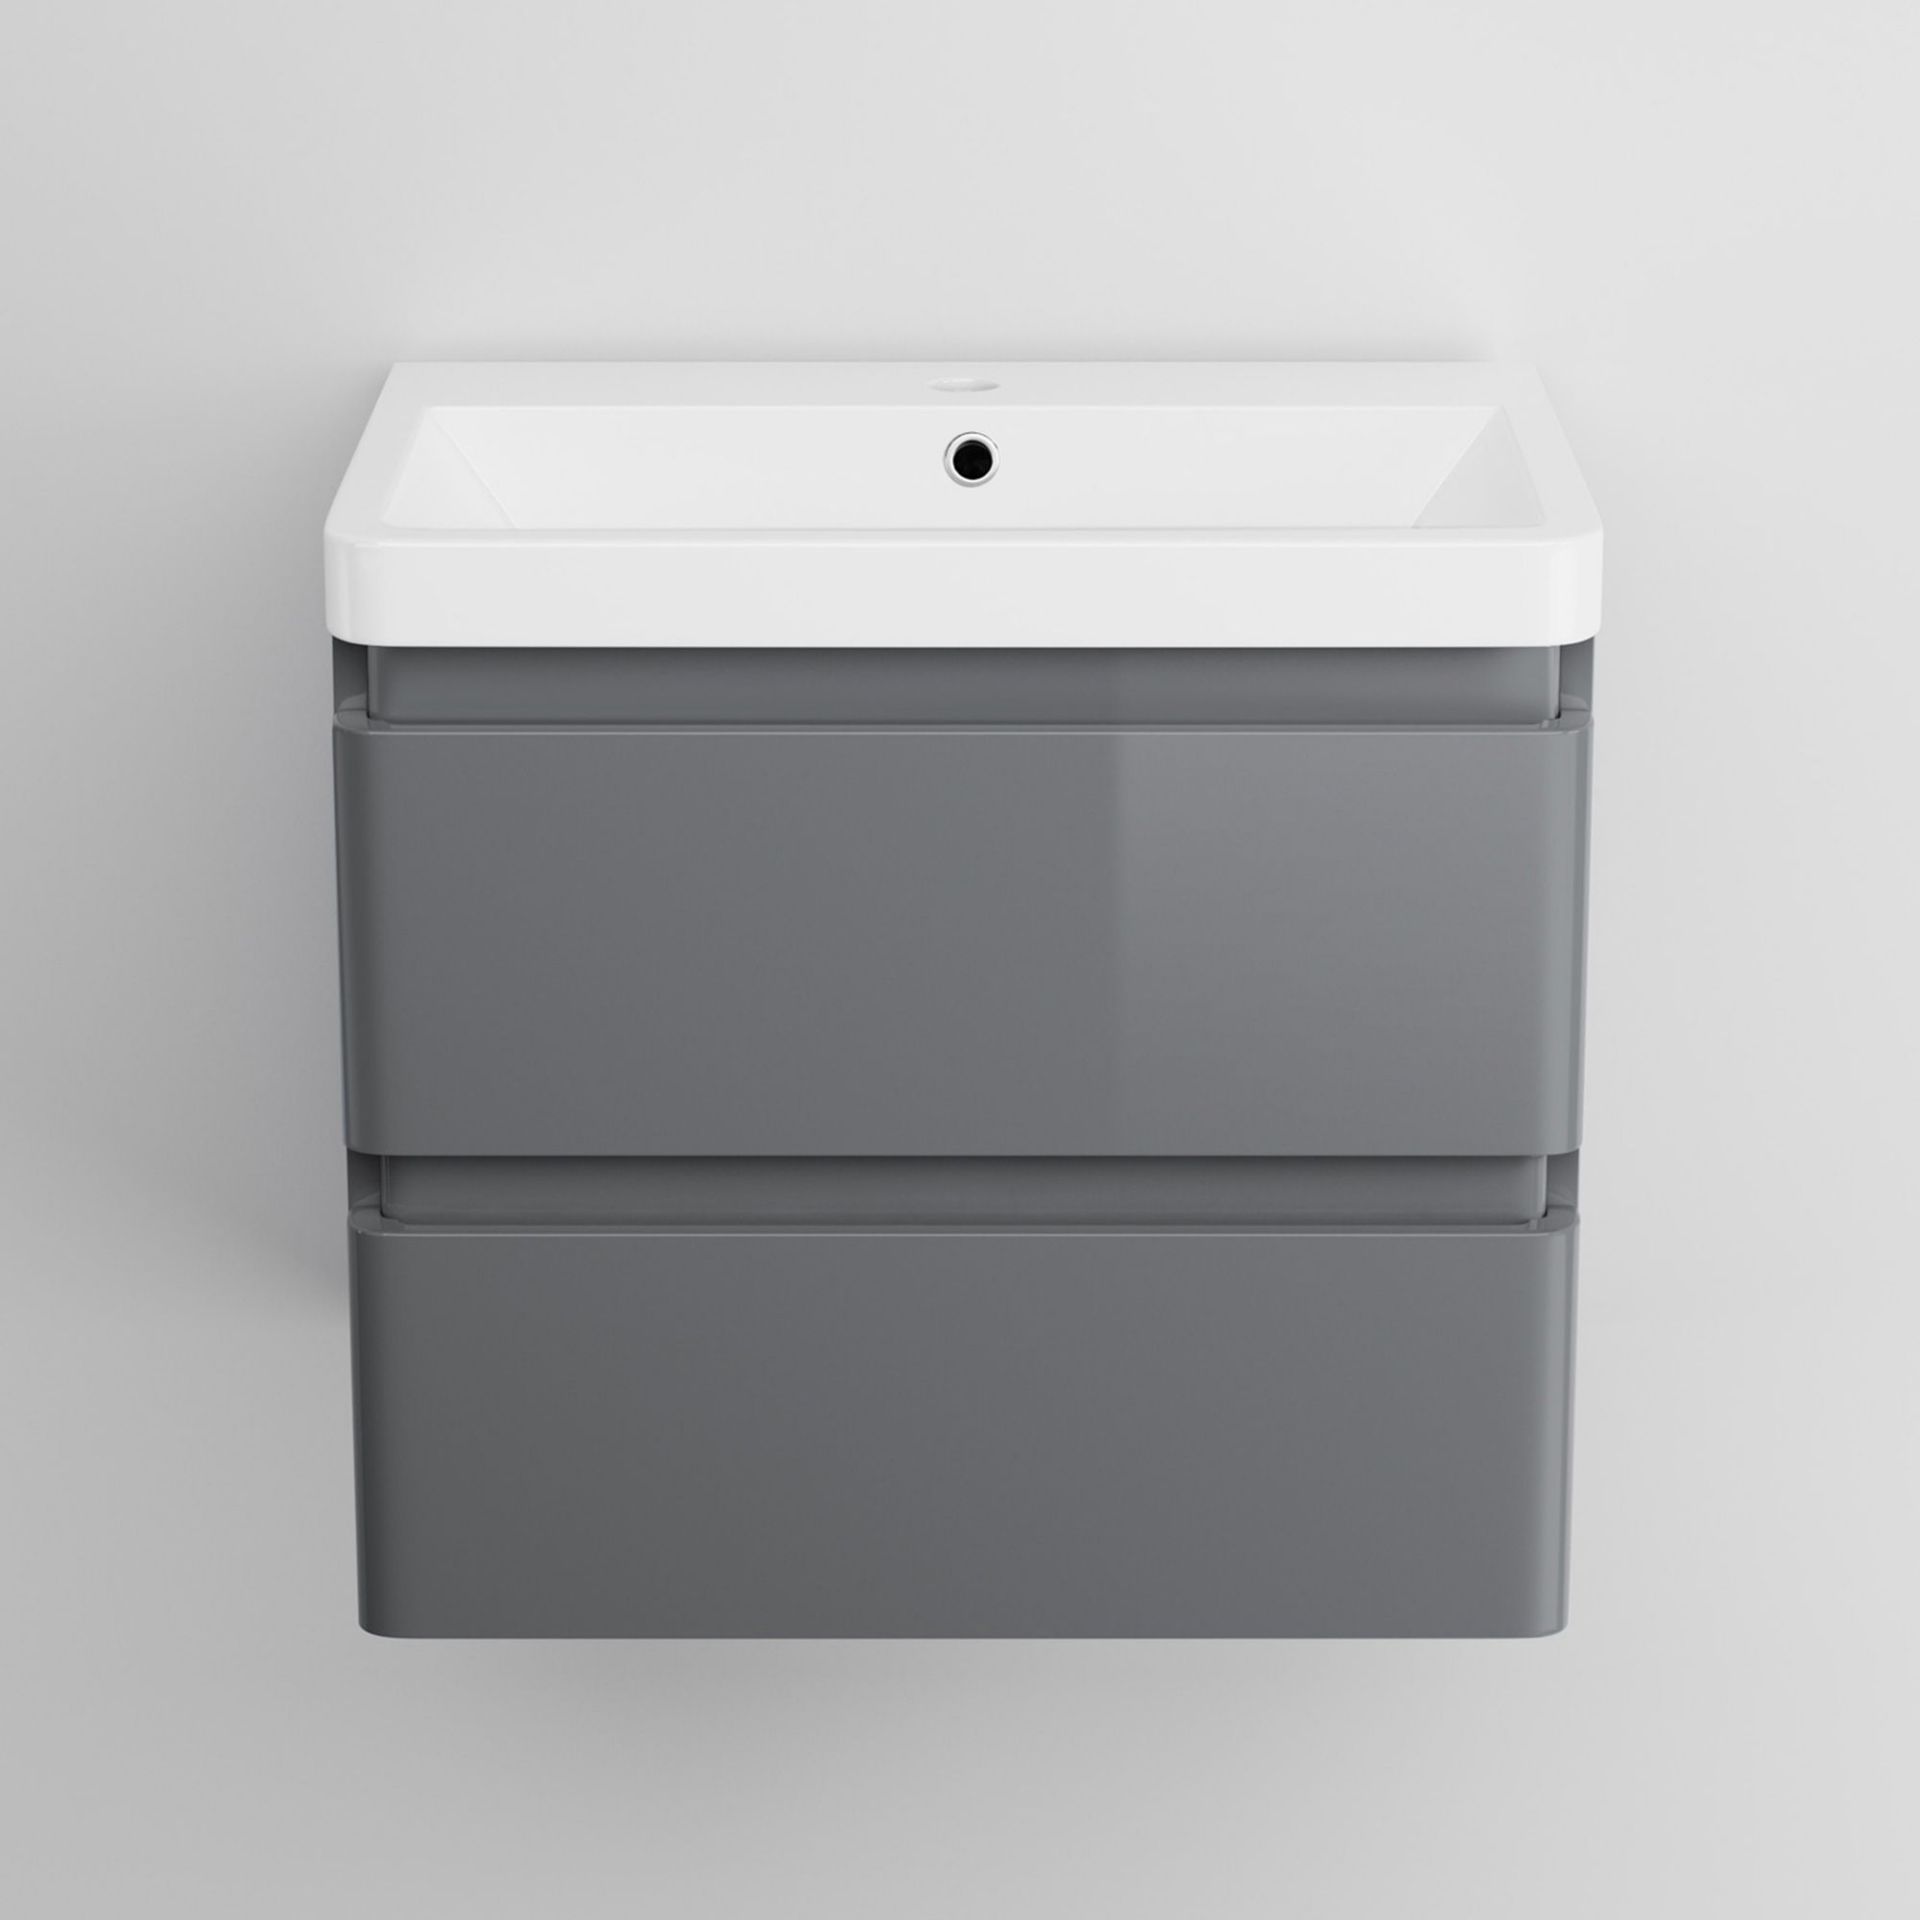 New & Boxed 600 mm Denver II Grey Built In Basin Drawer Unit - Wall Hung. RRP £849.99. Mf2402... - Image 2 of 2